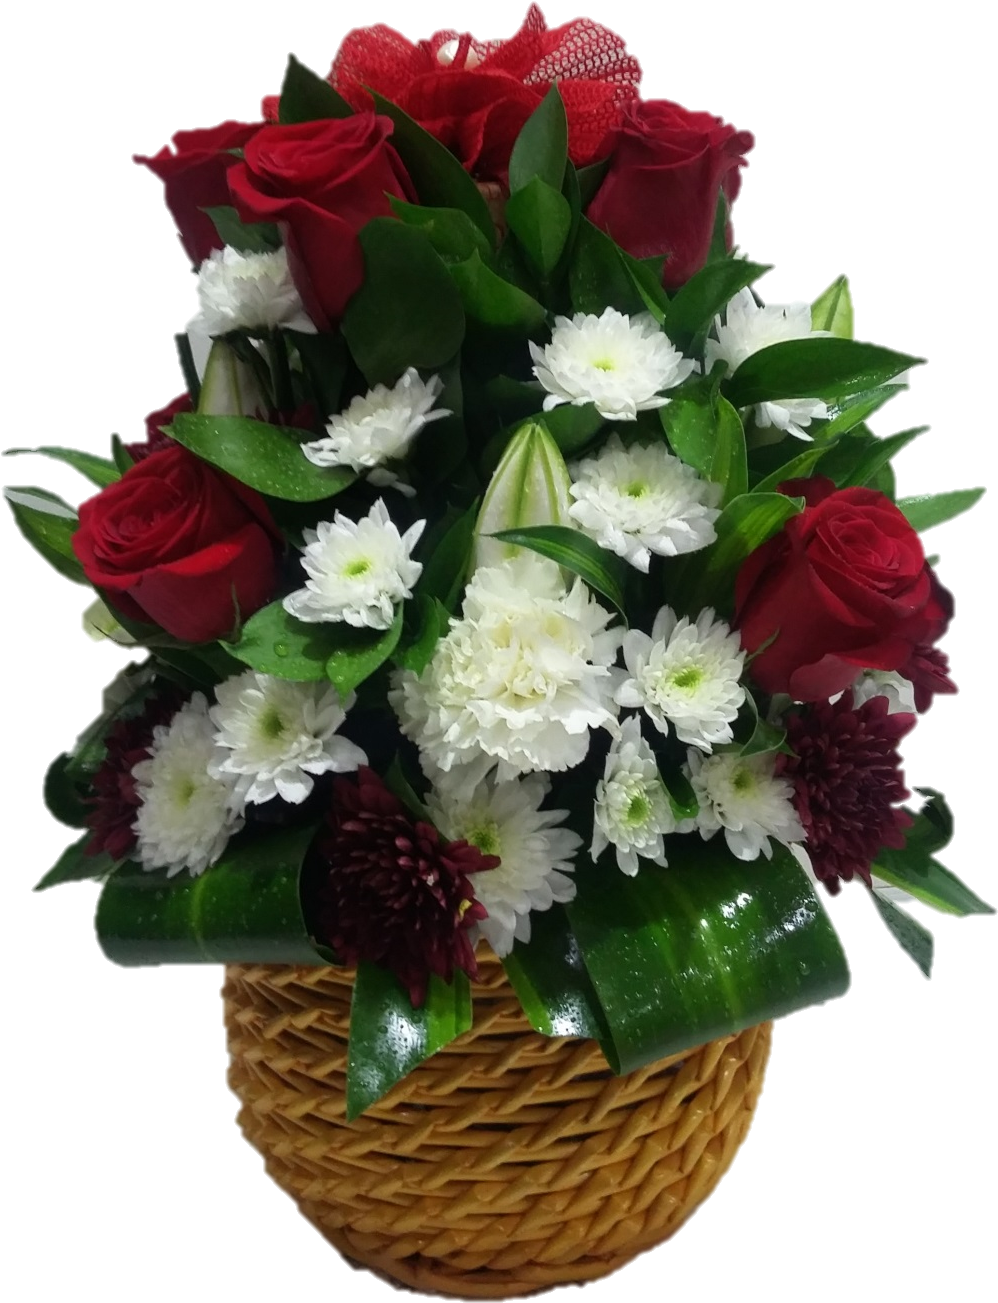 A Basket Of Flowers With Red Roses And White Flowers